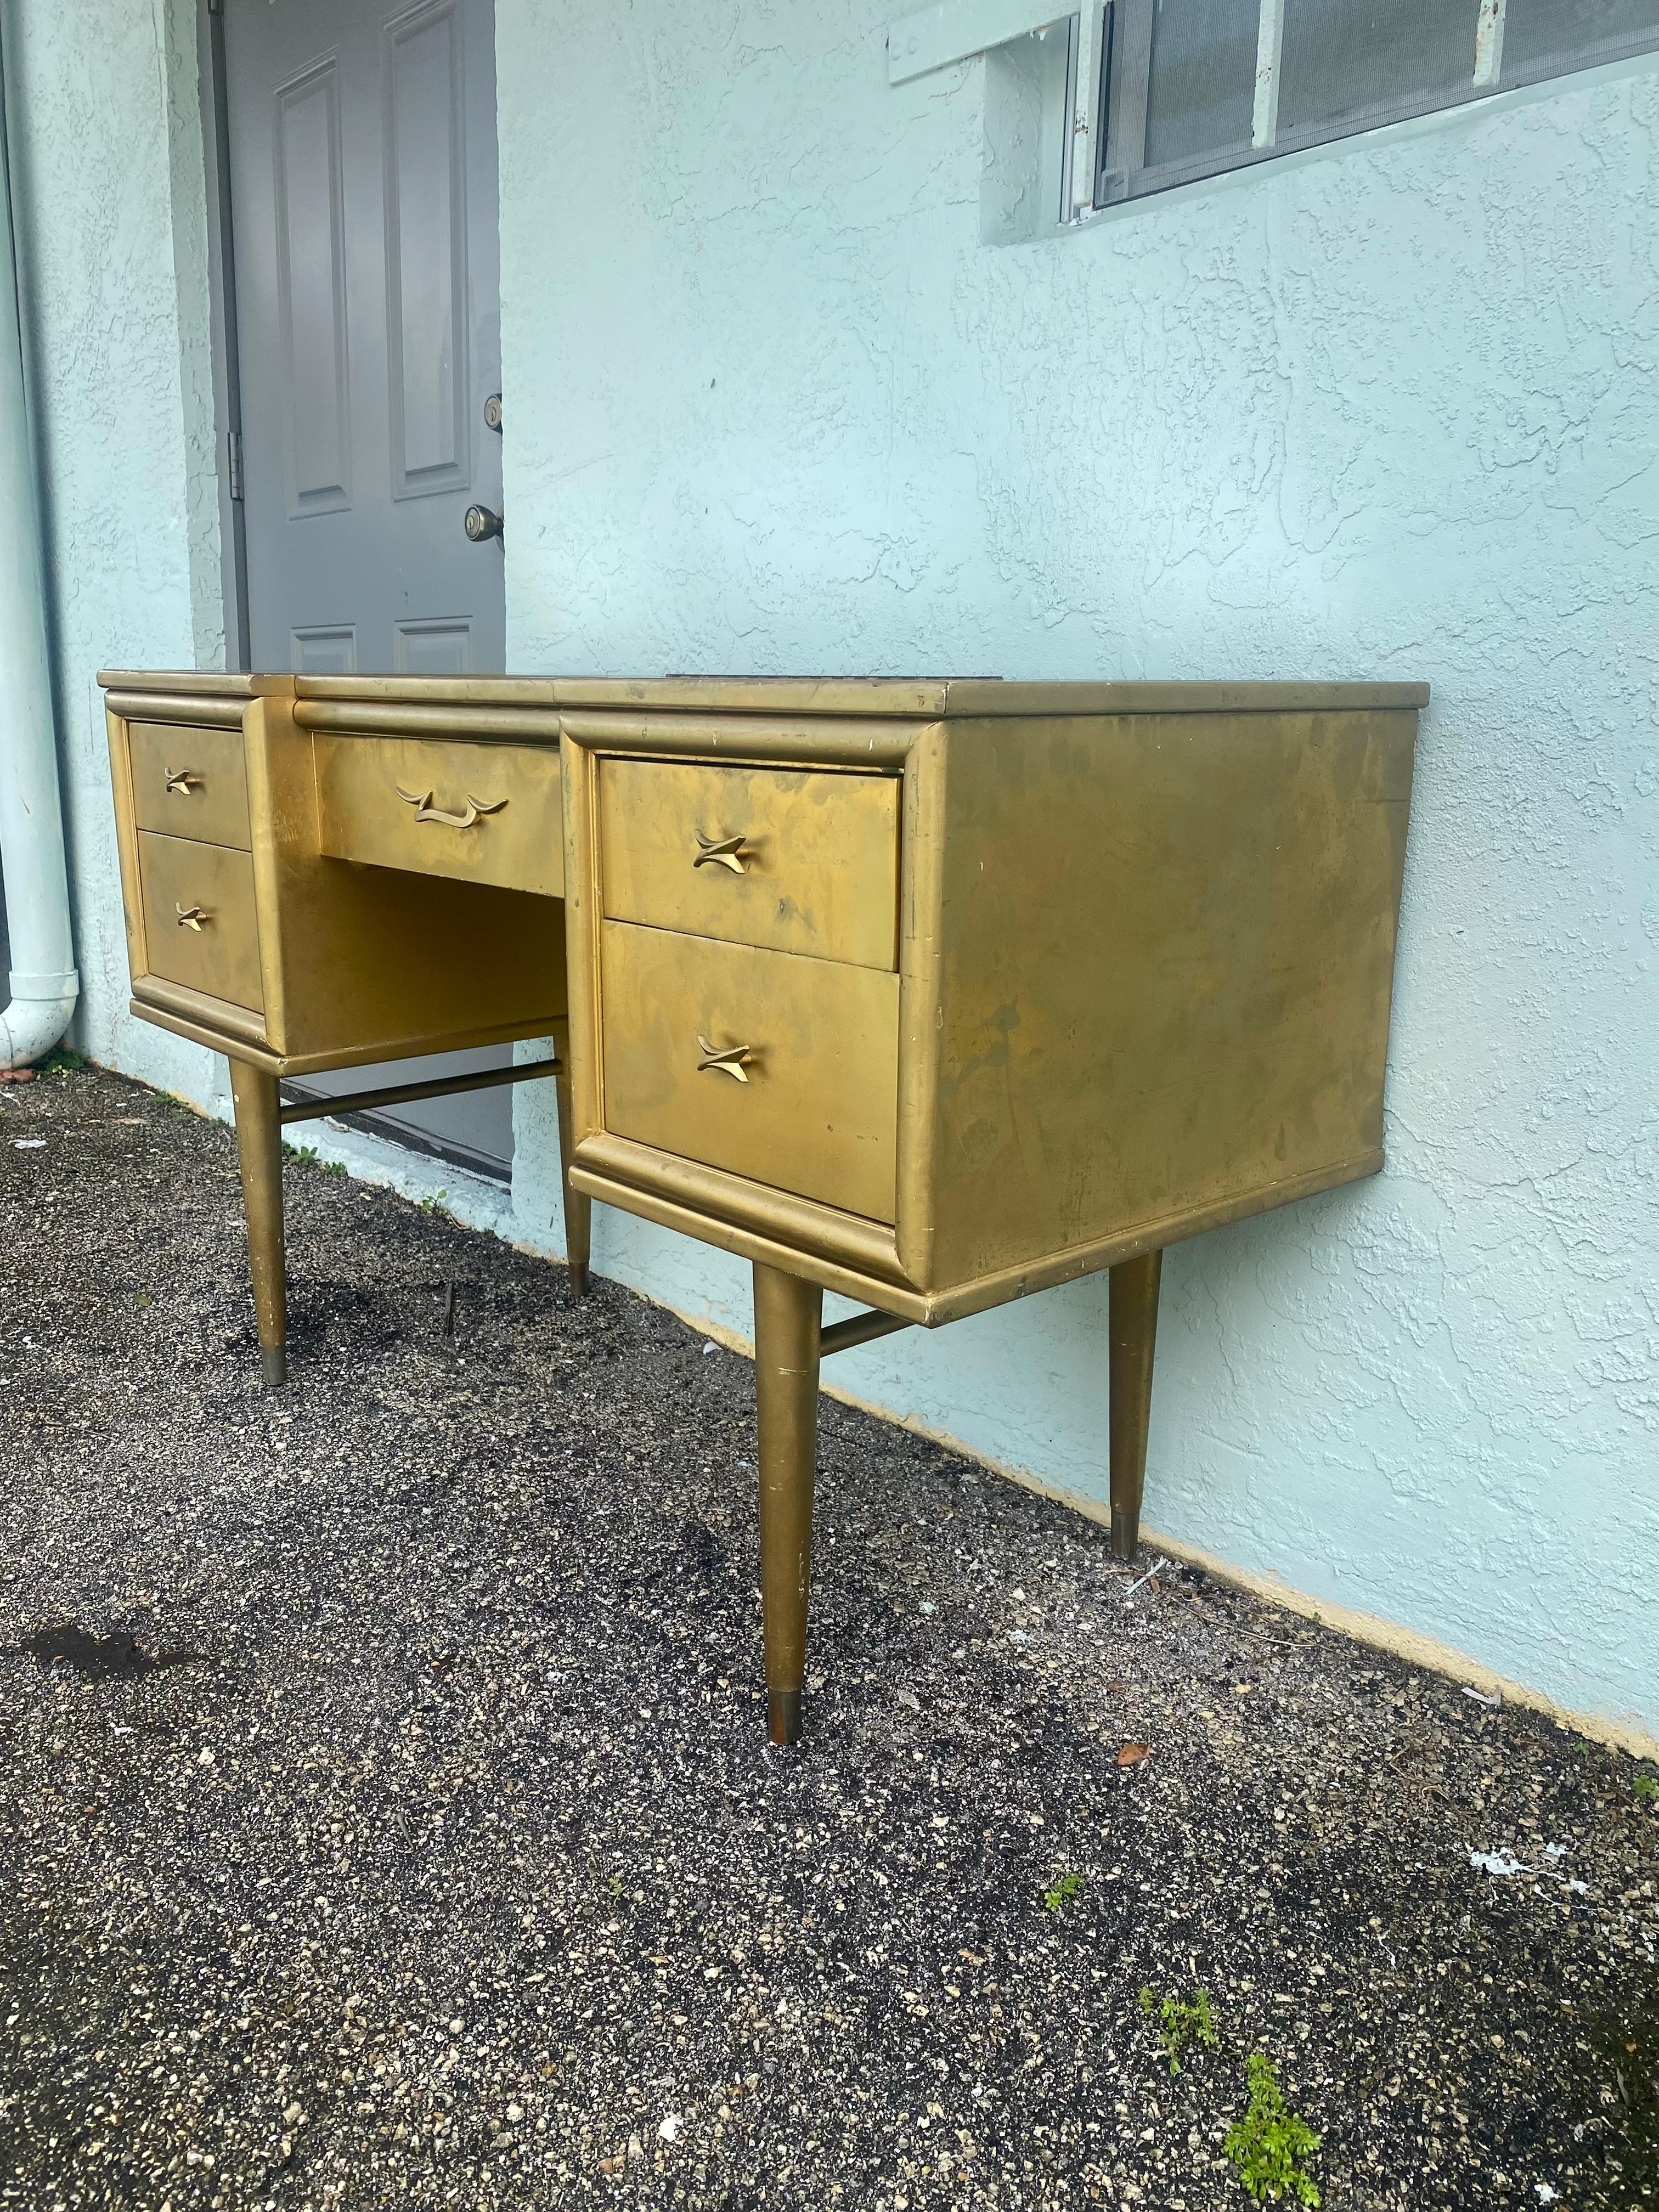 1960s Rway Gold Painted Mirrored Top Vanity Desk  In Good Condition For Sale In Fort Lauderdale, FL